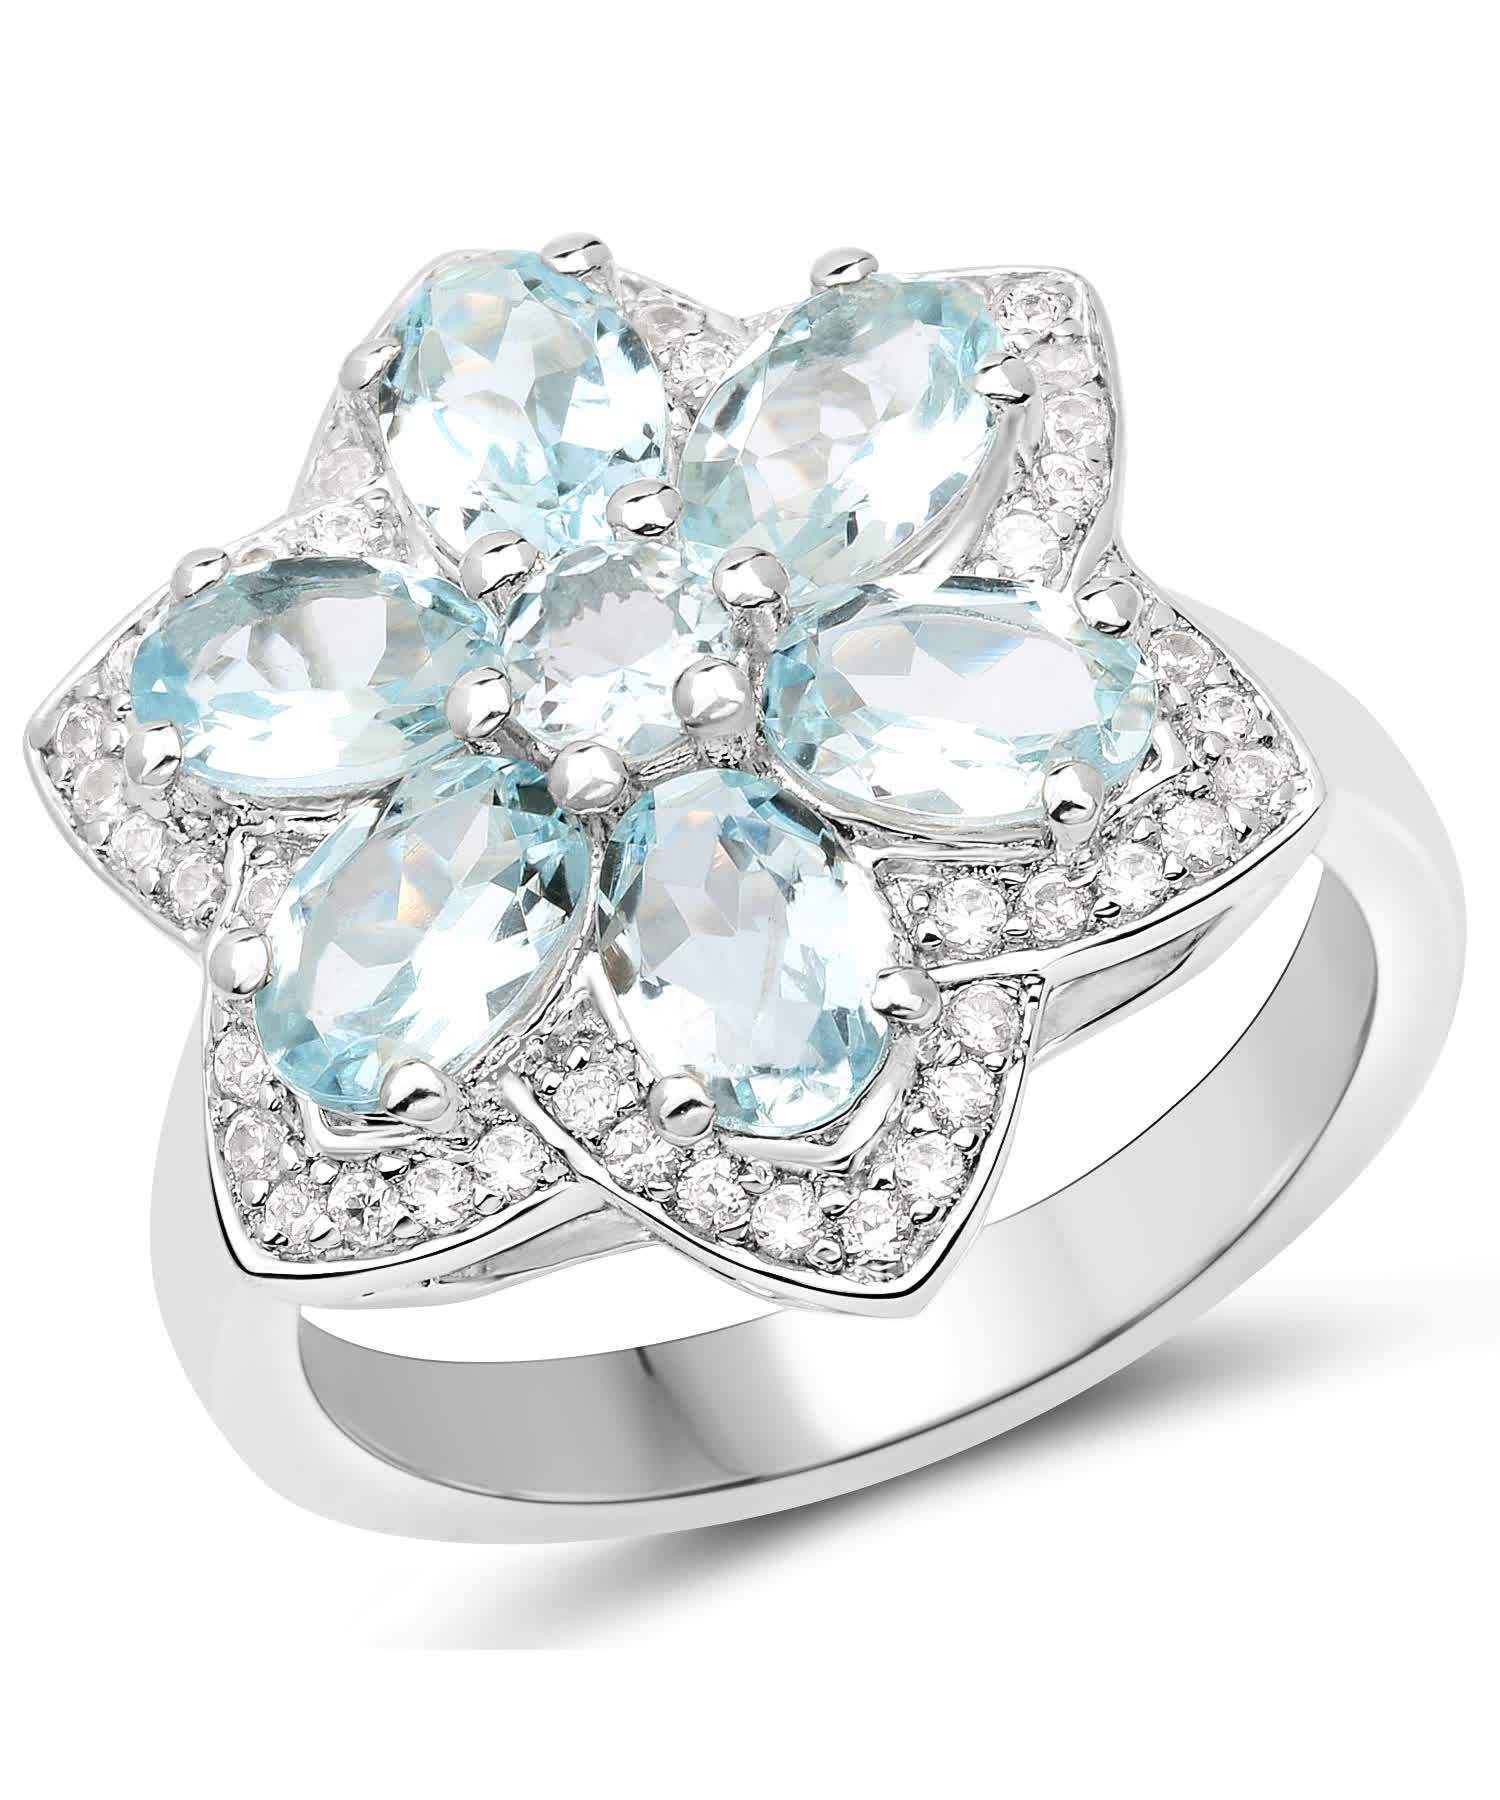 2.88ctw Natural Icy Sky Blue Aquamarine and Zircon Rhodium Plated 925 Sterling Silver Flower Cocktail Ring View 1